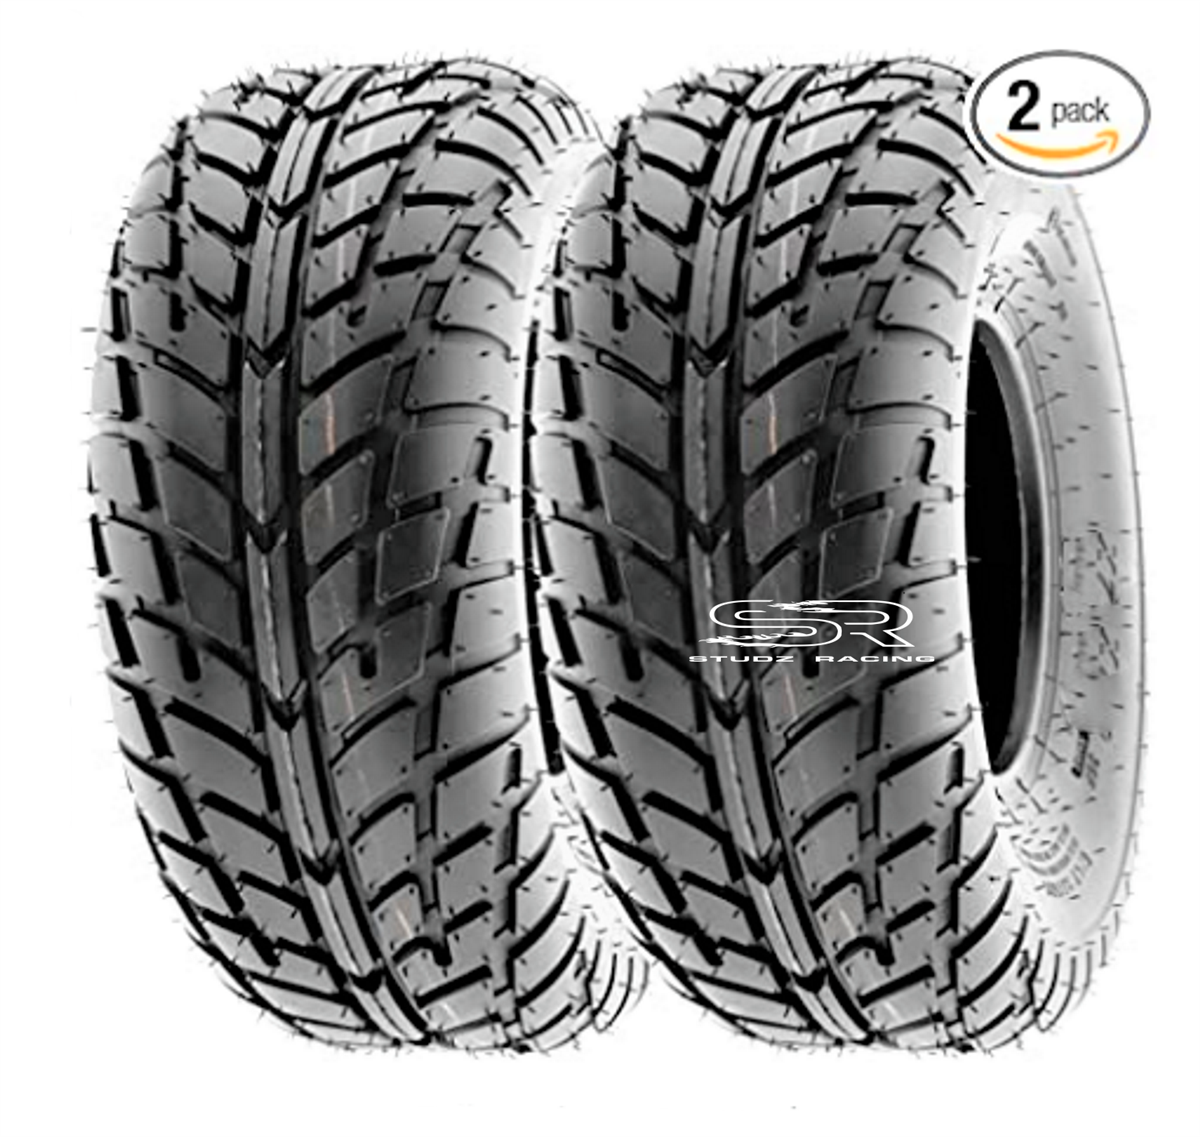 (2 Pack Special Price ) SunF 145/70-6 6 Ply Tubeless Tire